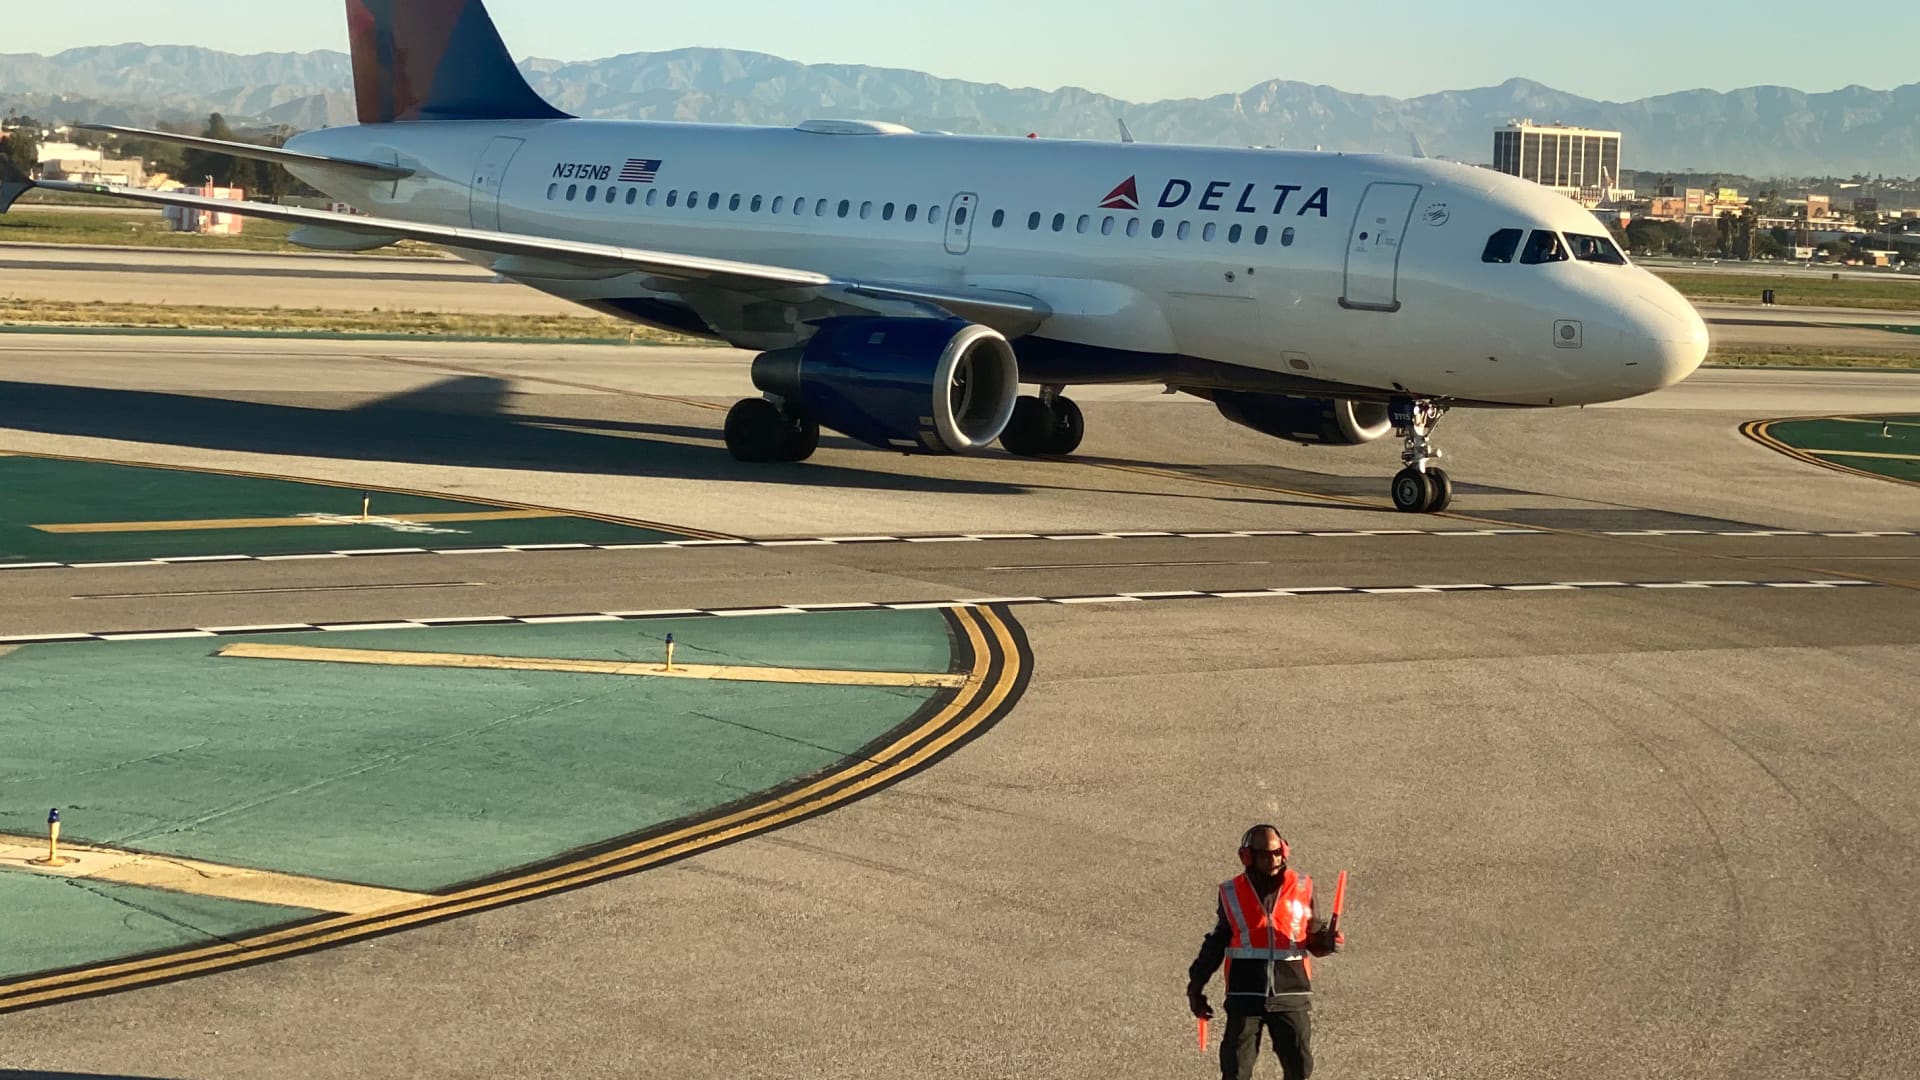 An airport worker guides a Delta Air Lines Airbus A319-100 plane on the tarmac at LAX in Los Angeles, California, U.S., January 6, 2020.